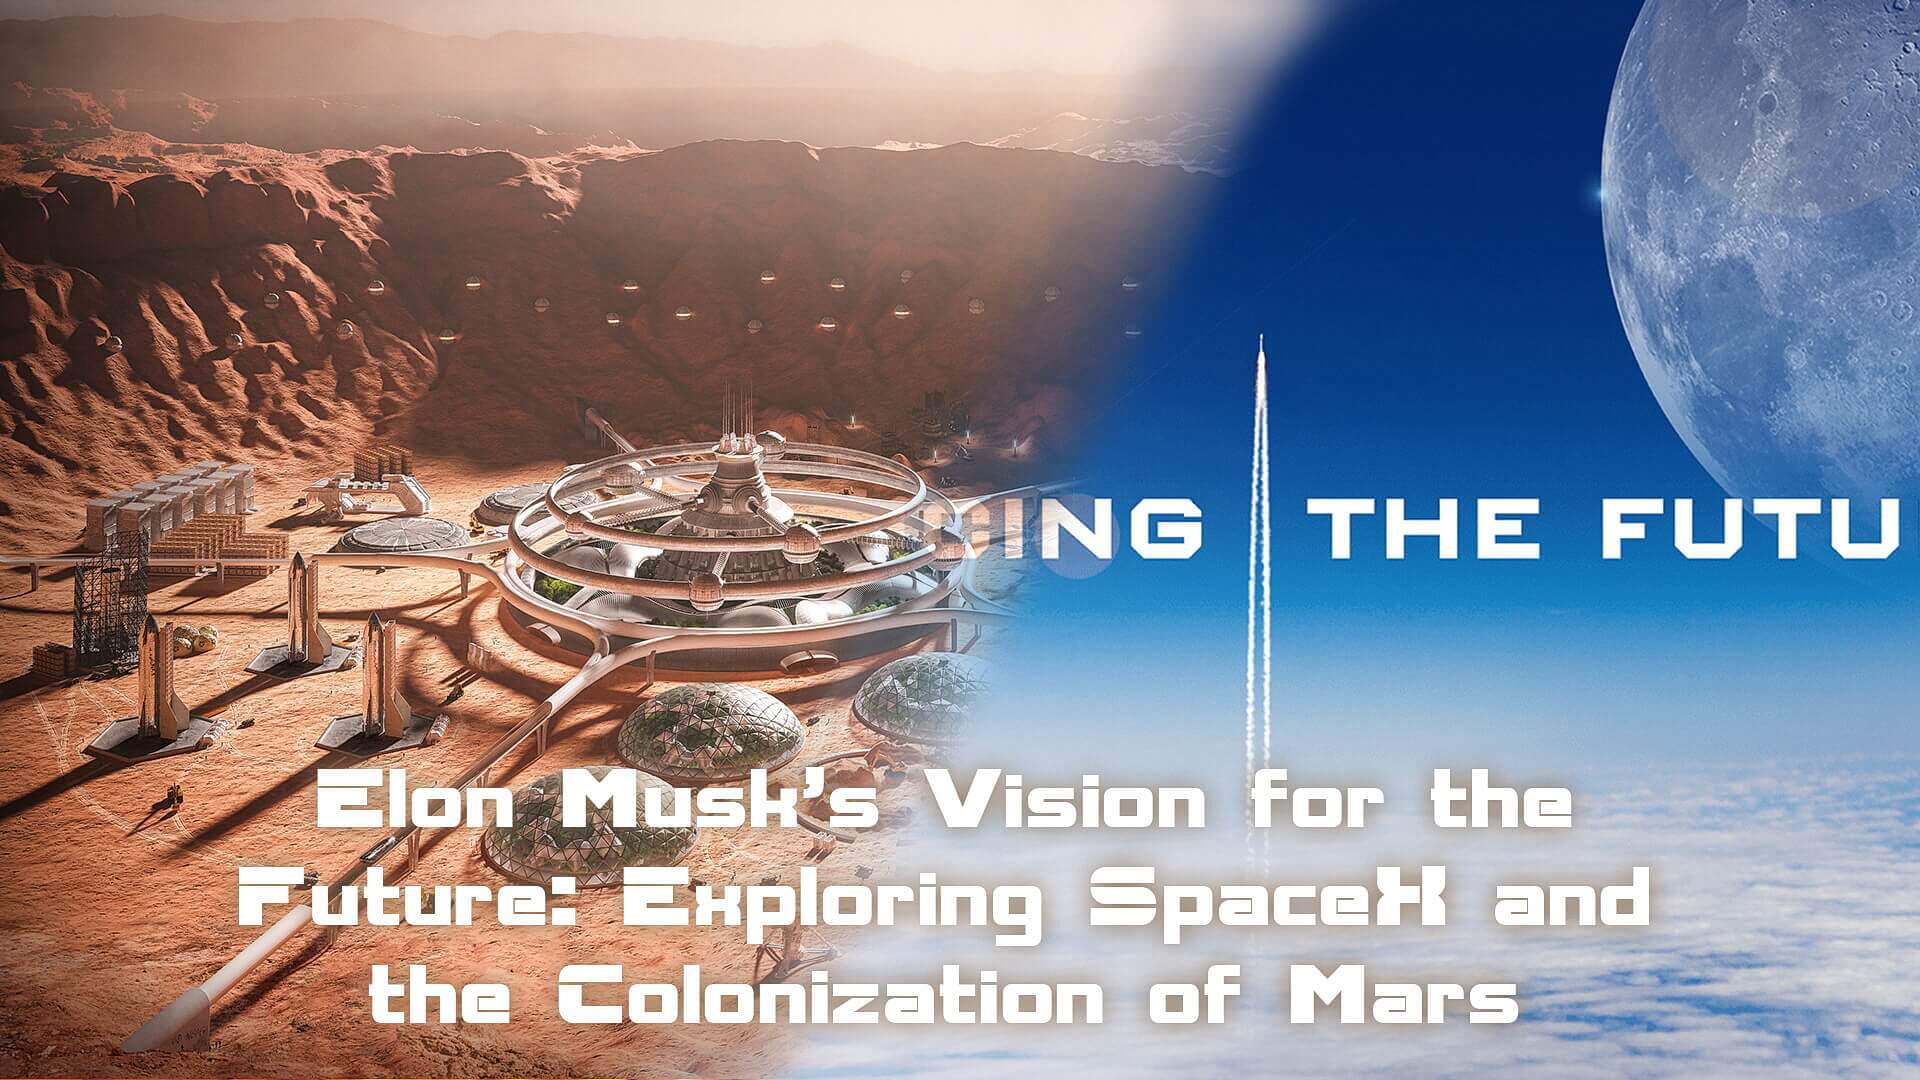 Elon Musk’s Vision for the Future: Exploring SpaceX and the Colonization of Mars